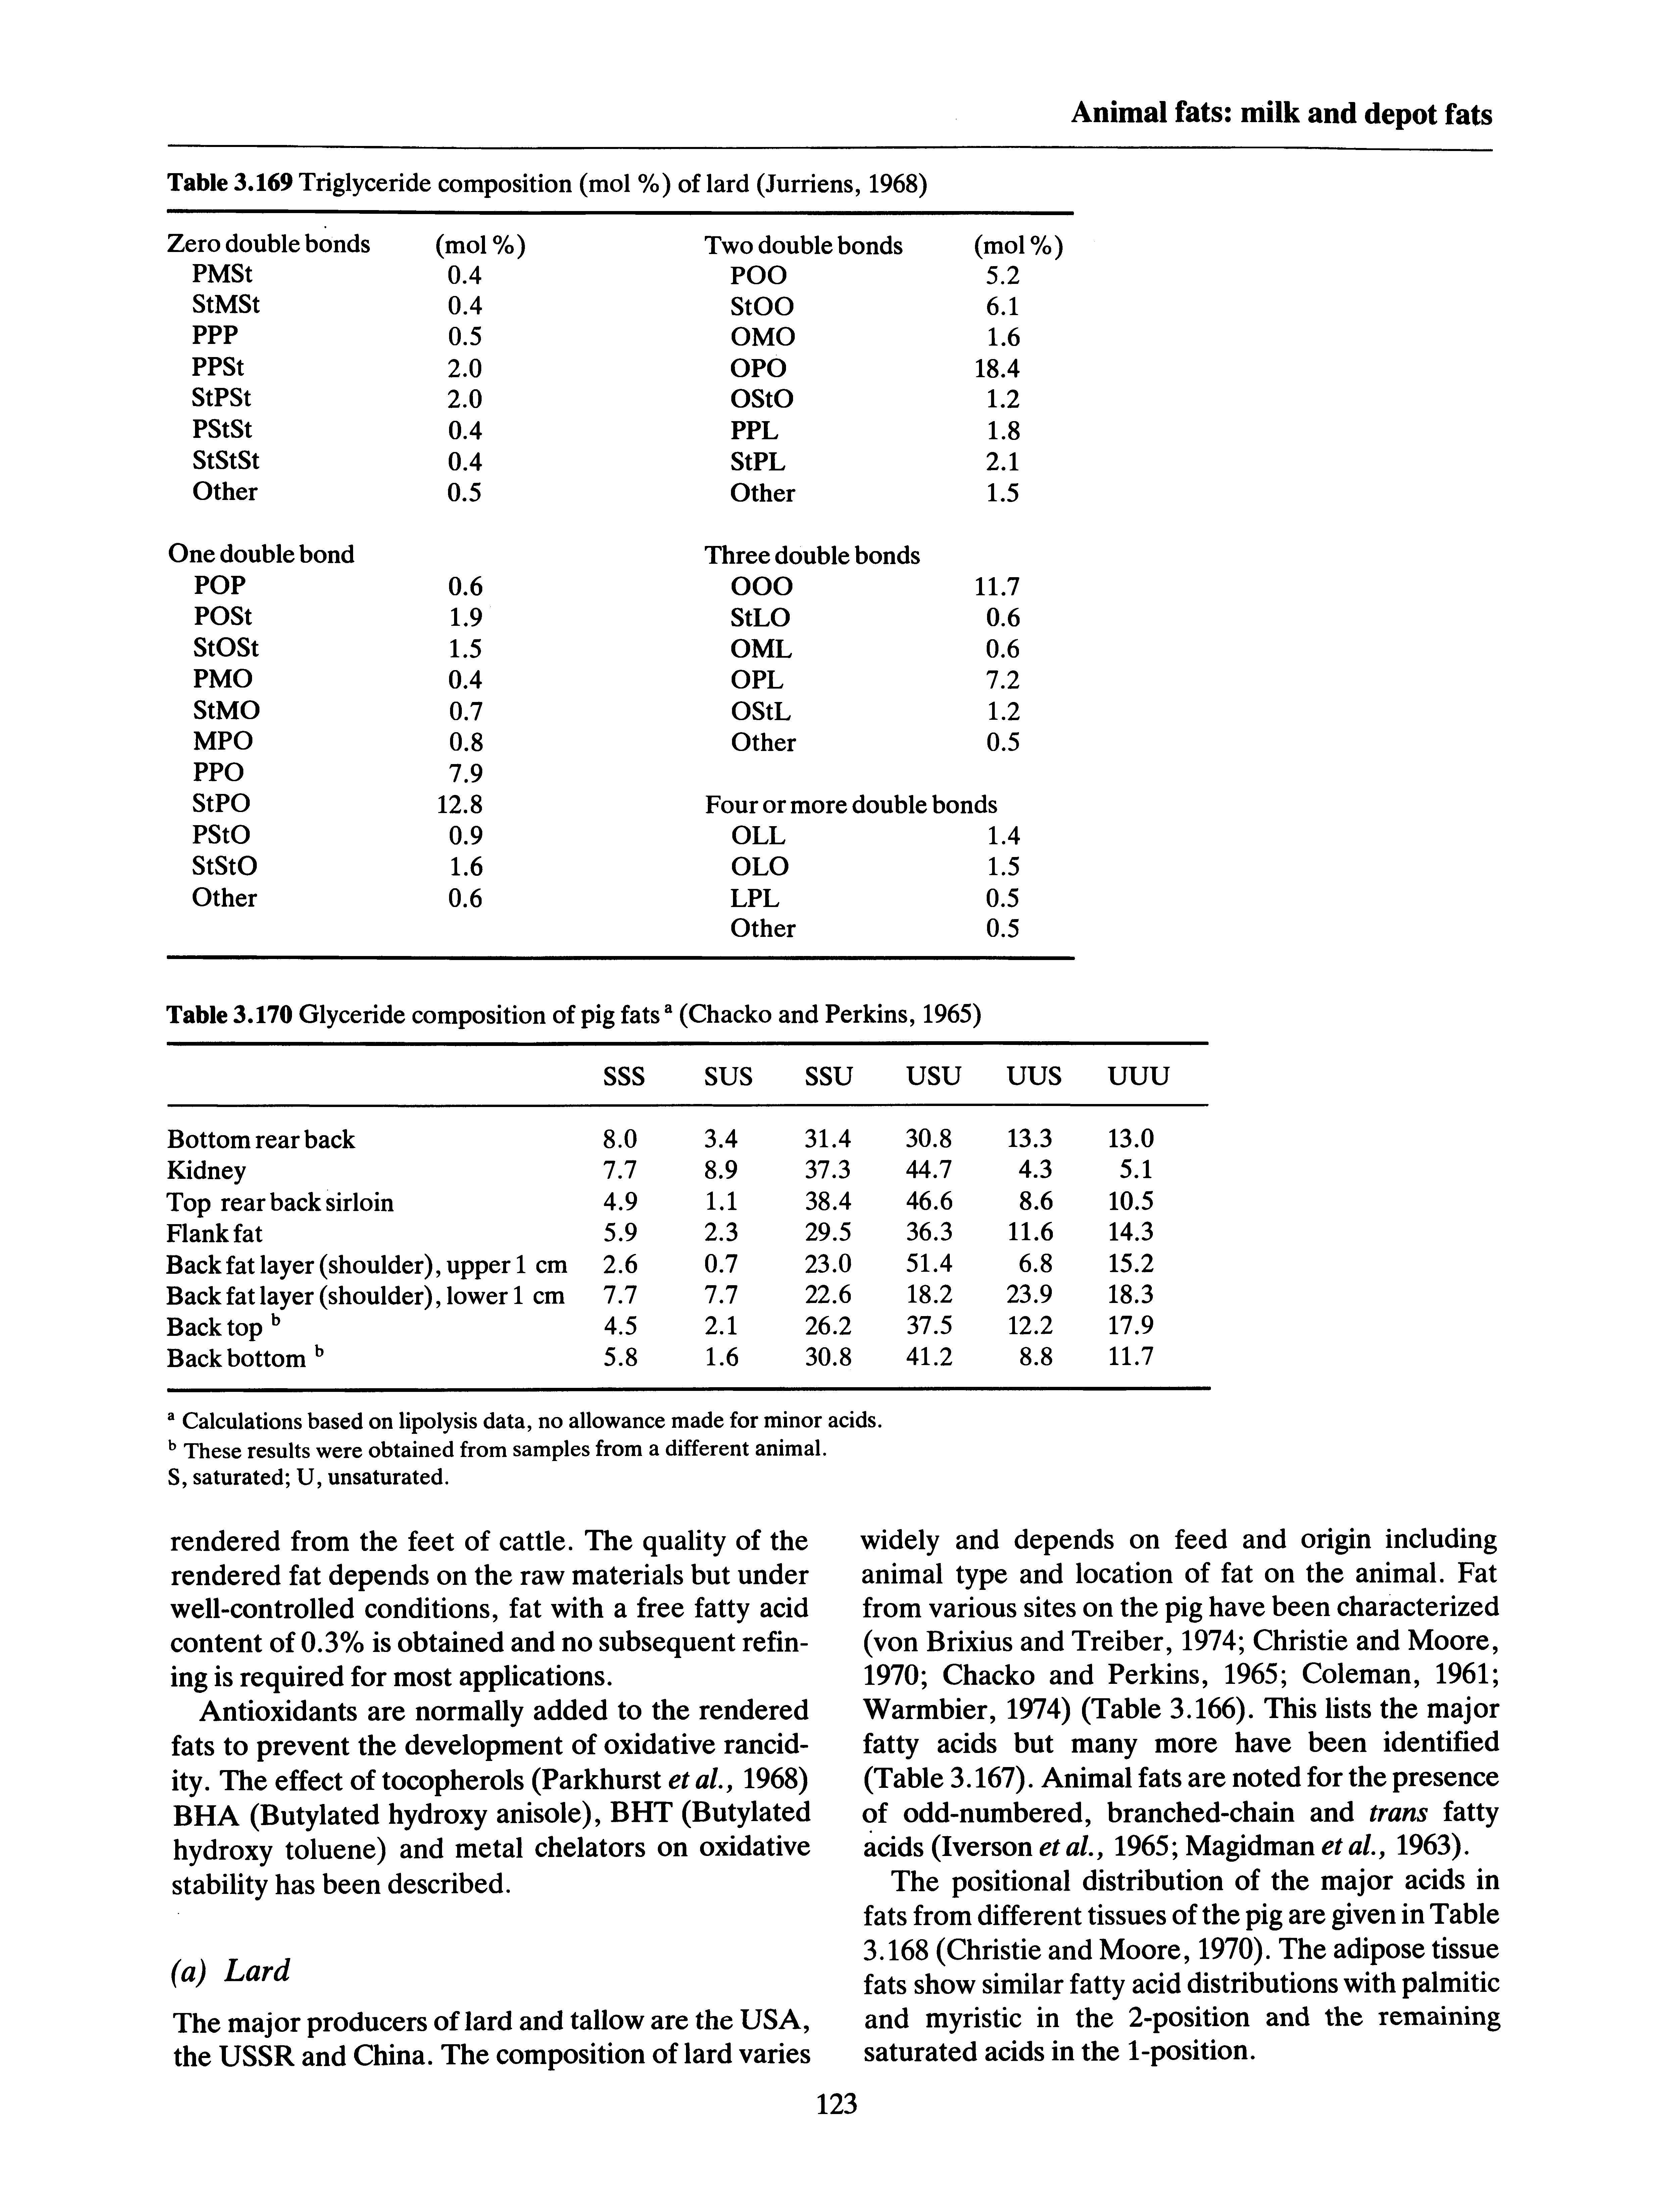 Table 3.170 Glyceride composition of pig fats (Chacko and Perkins, 1965)...